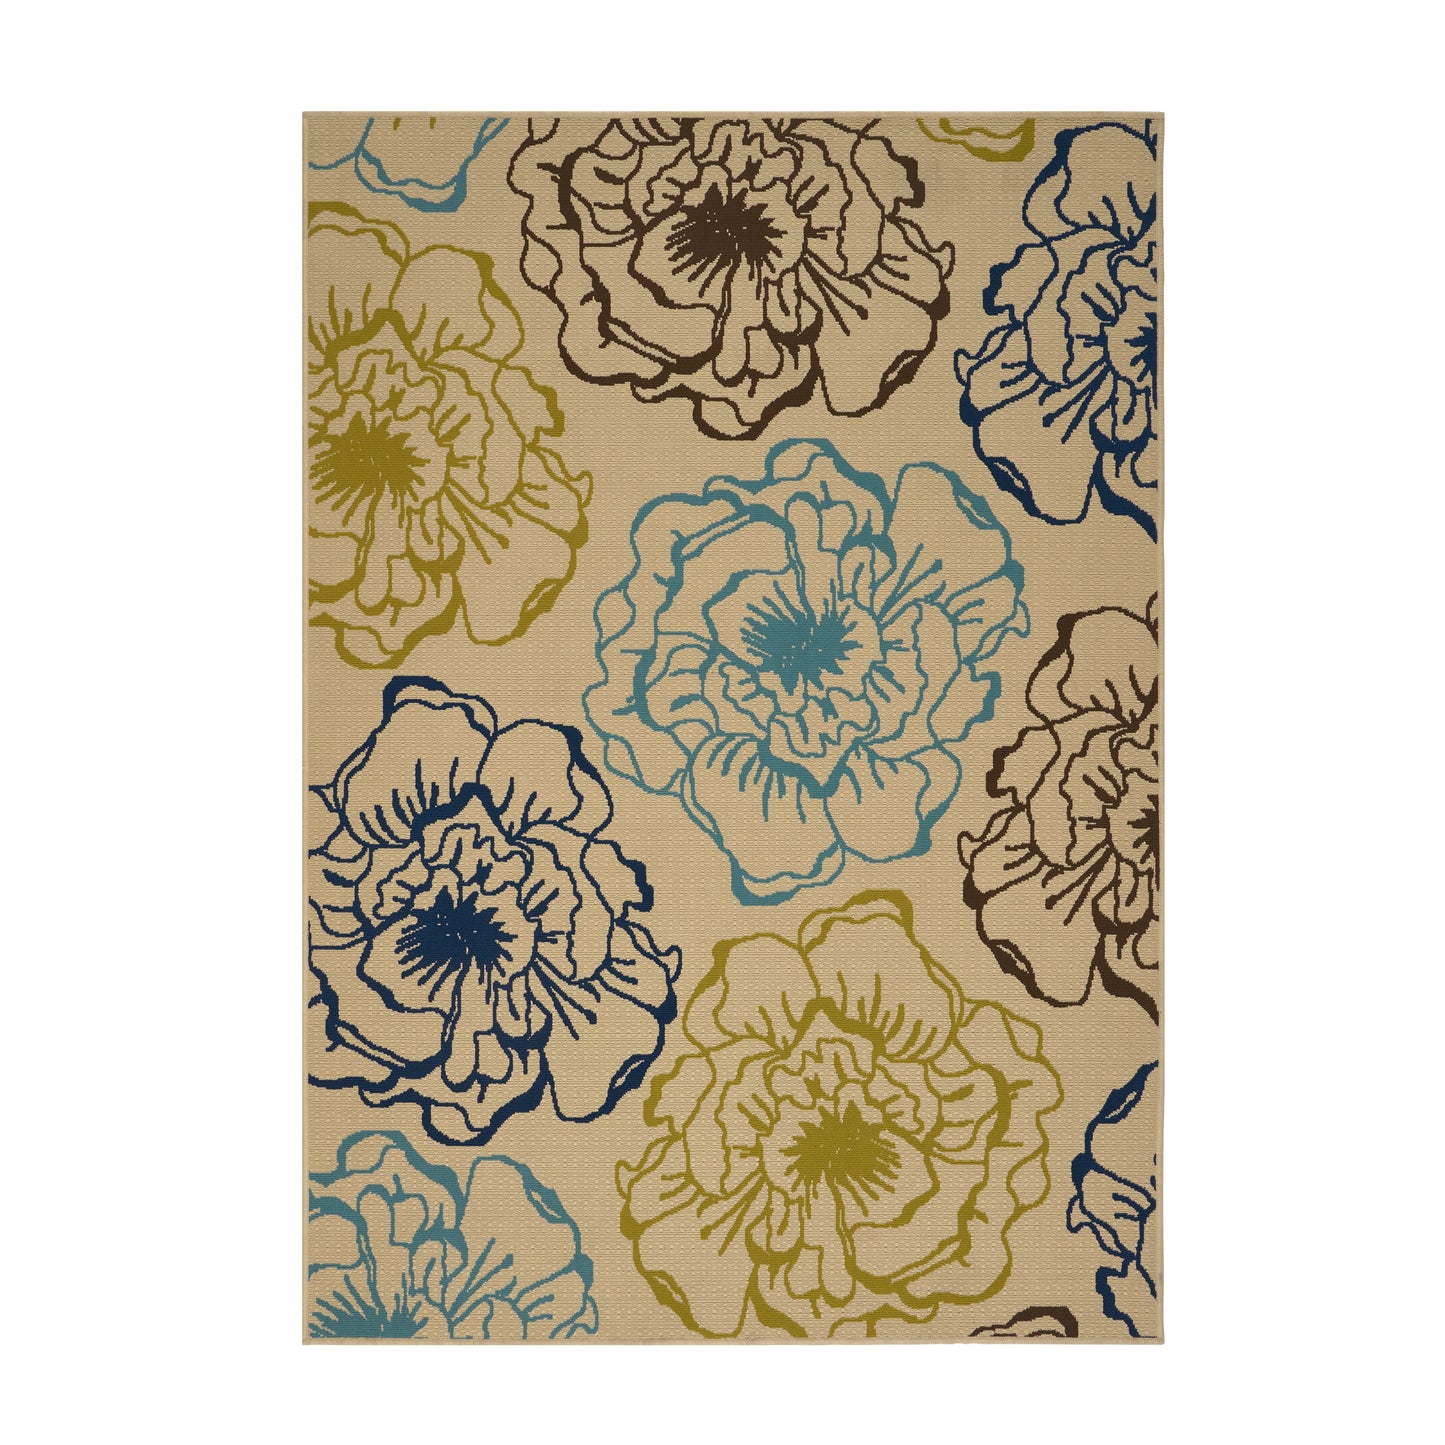 Damaris Outdoor Floral 5 x 8 Area Rug, Ivory and Multicolored